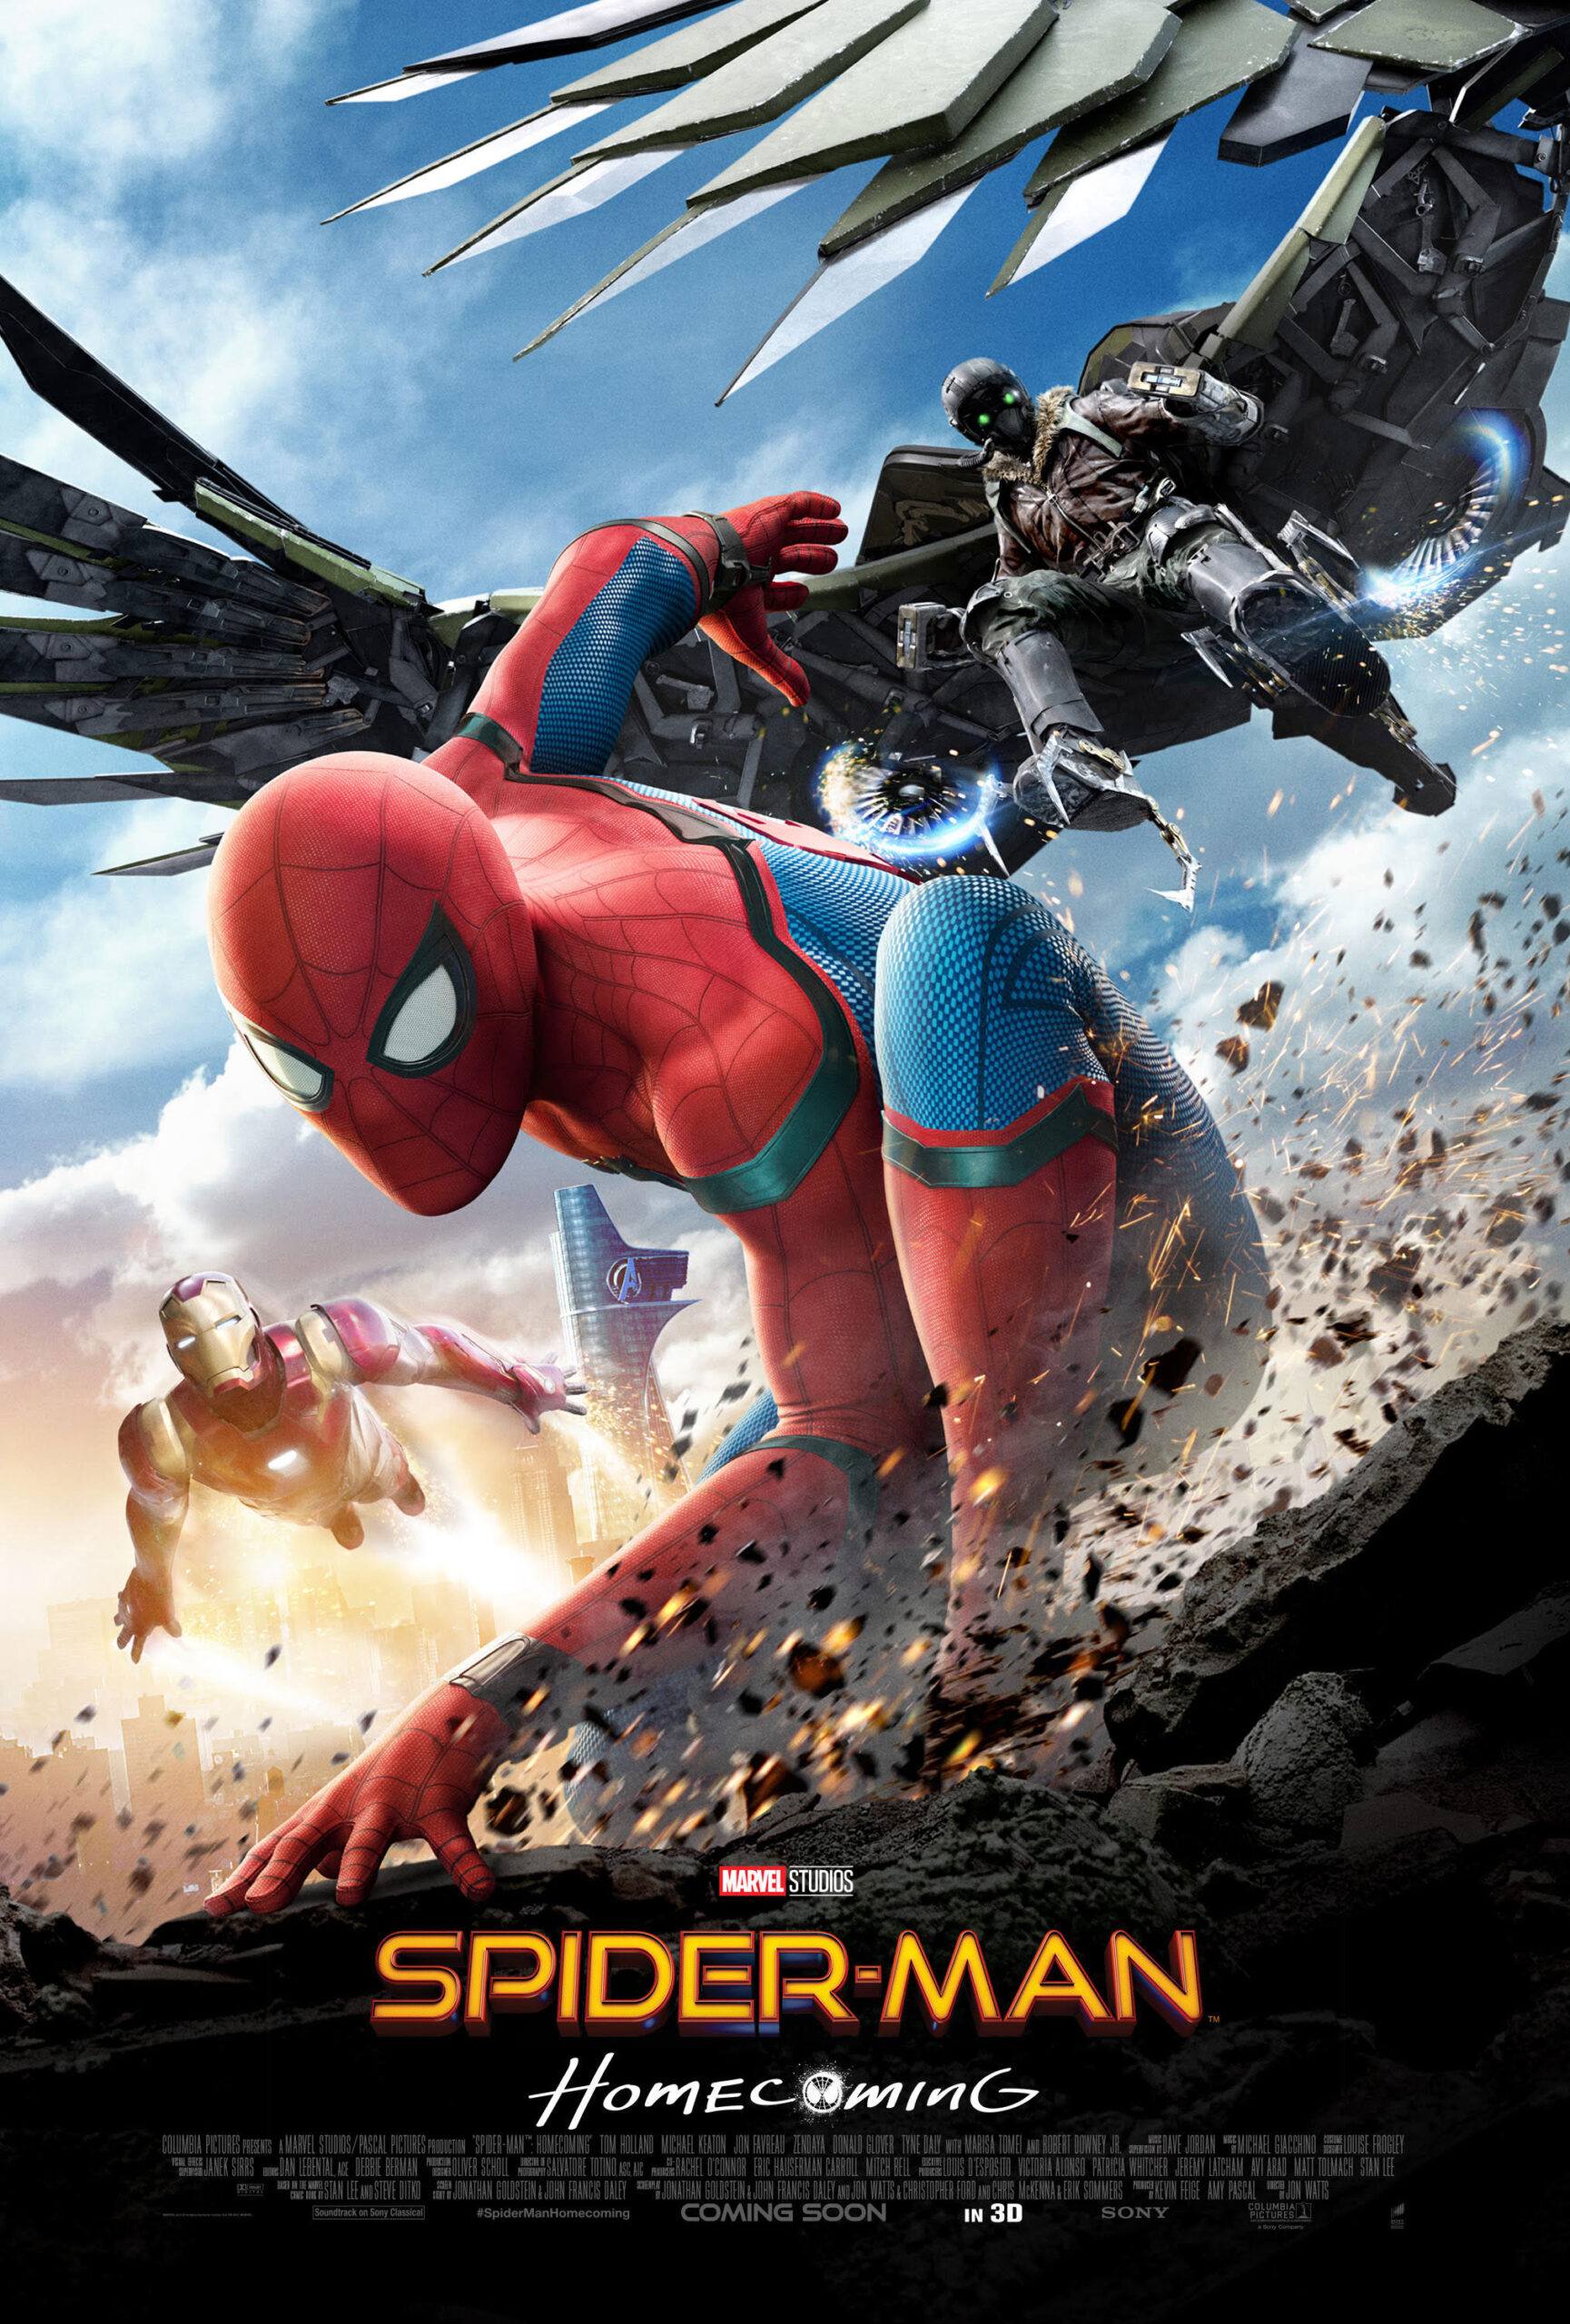 Spiderman Poster HOMECOMING New Movie 2017 Marvel Film FREE P+P CHOOSE YOUR SIZE 